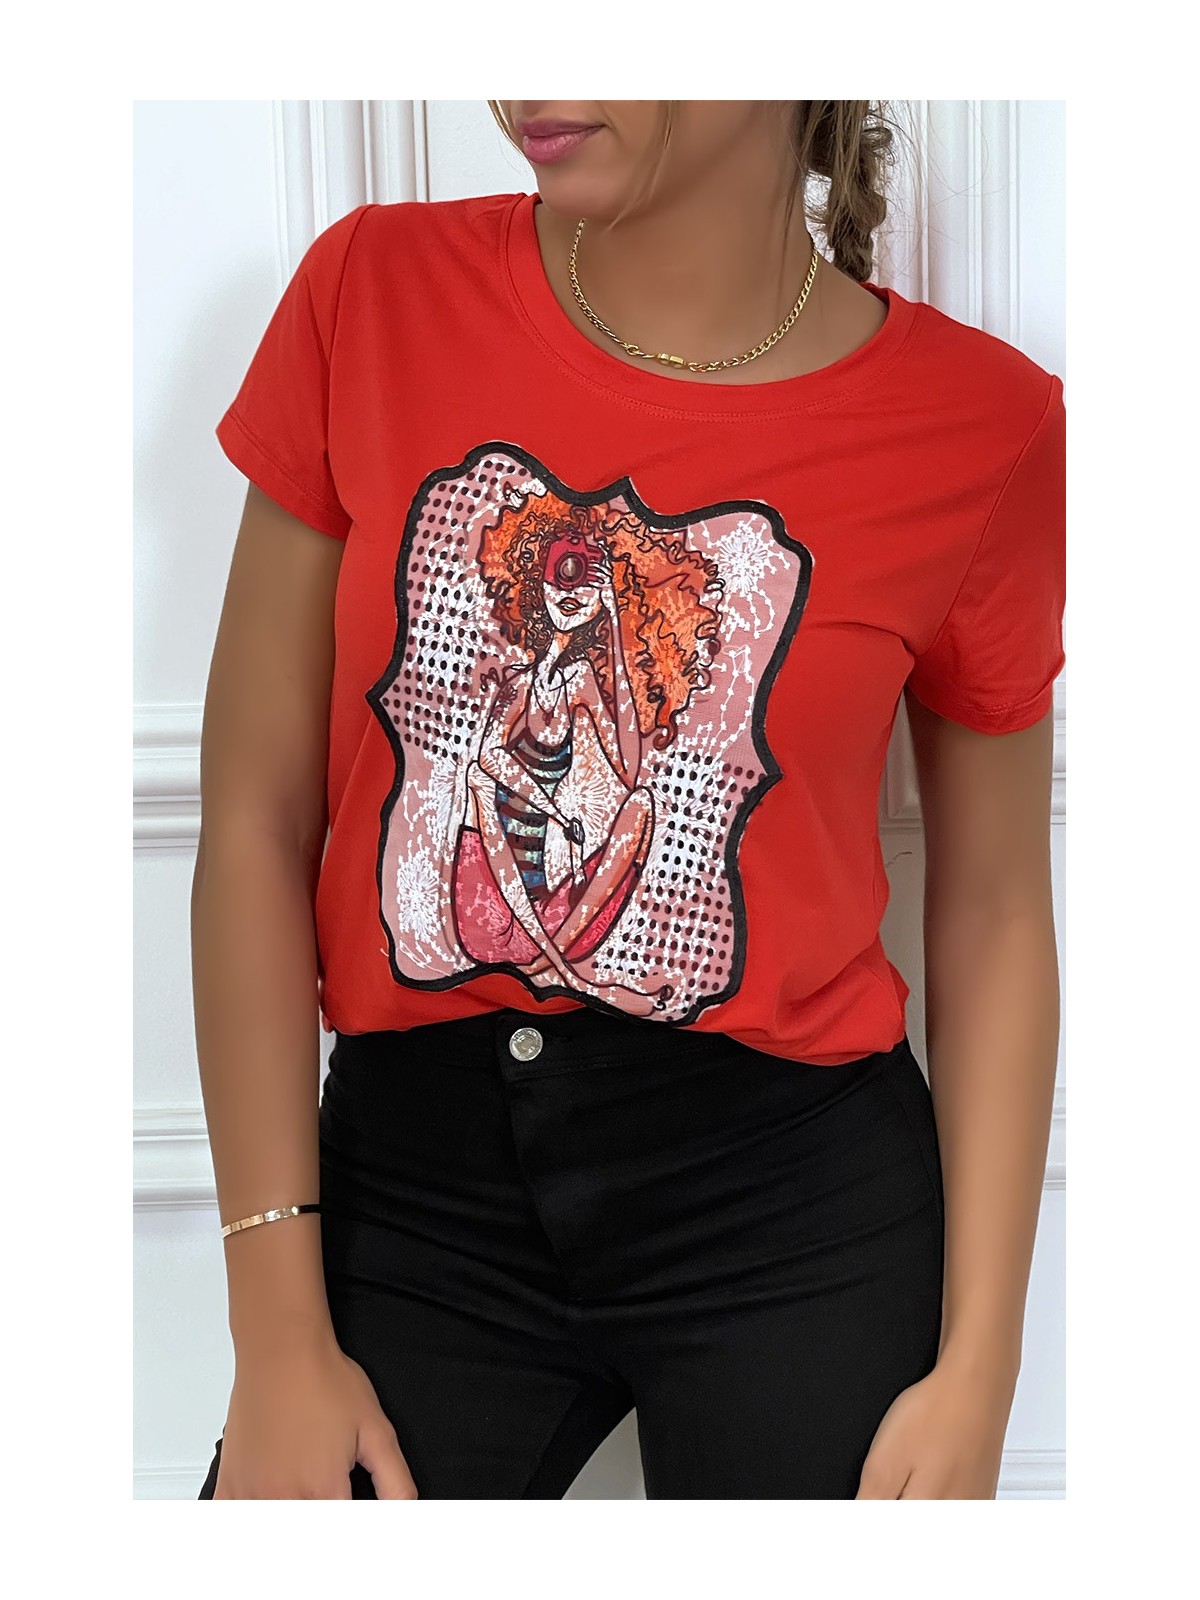 T-RTirt dessin girly rouge - 1